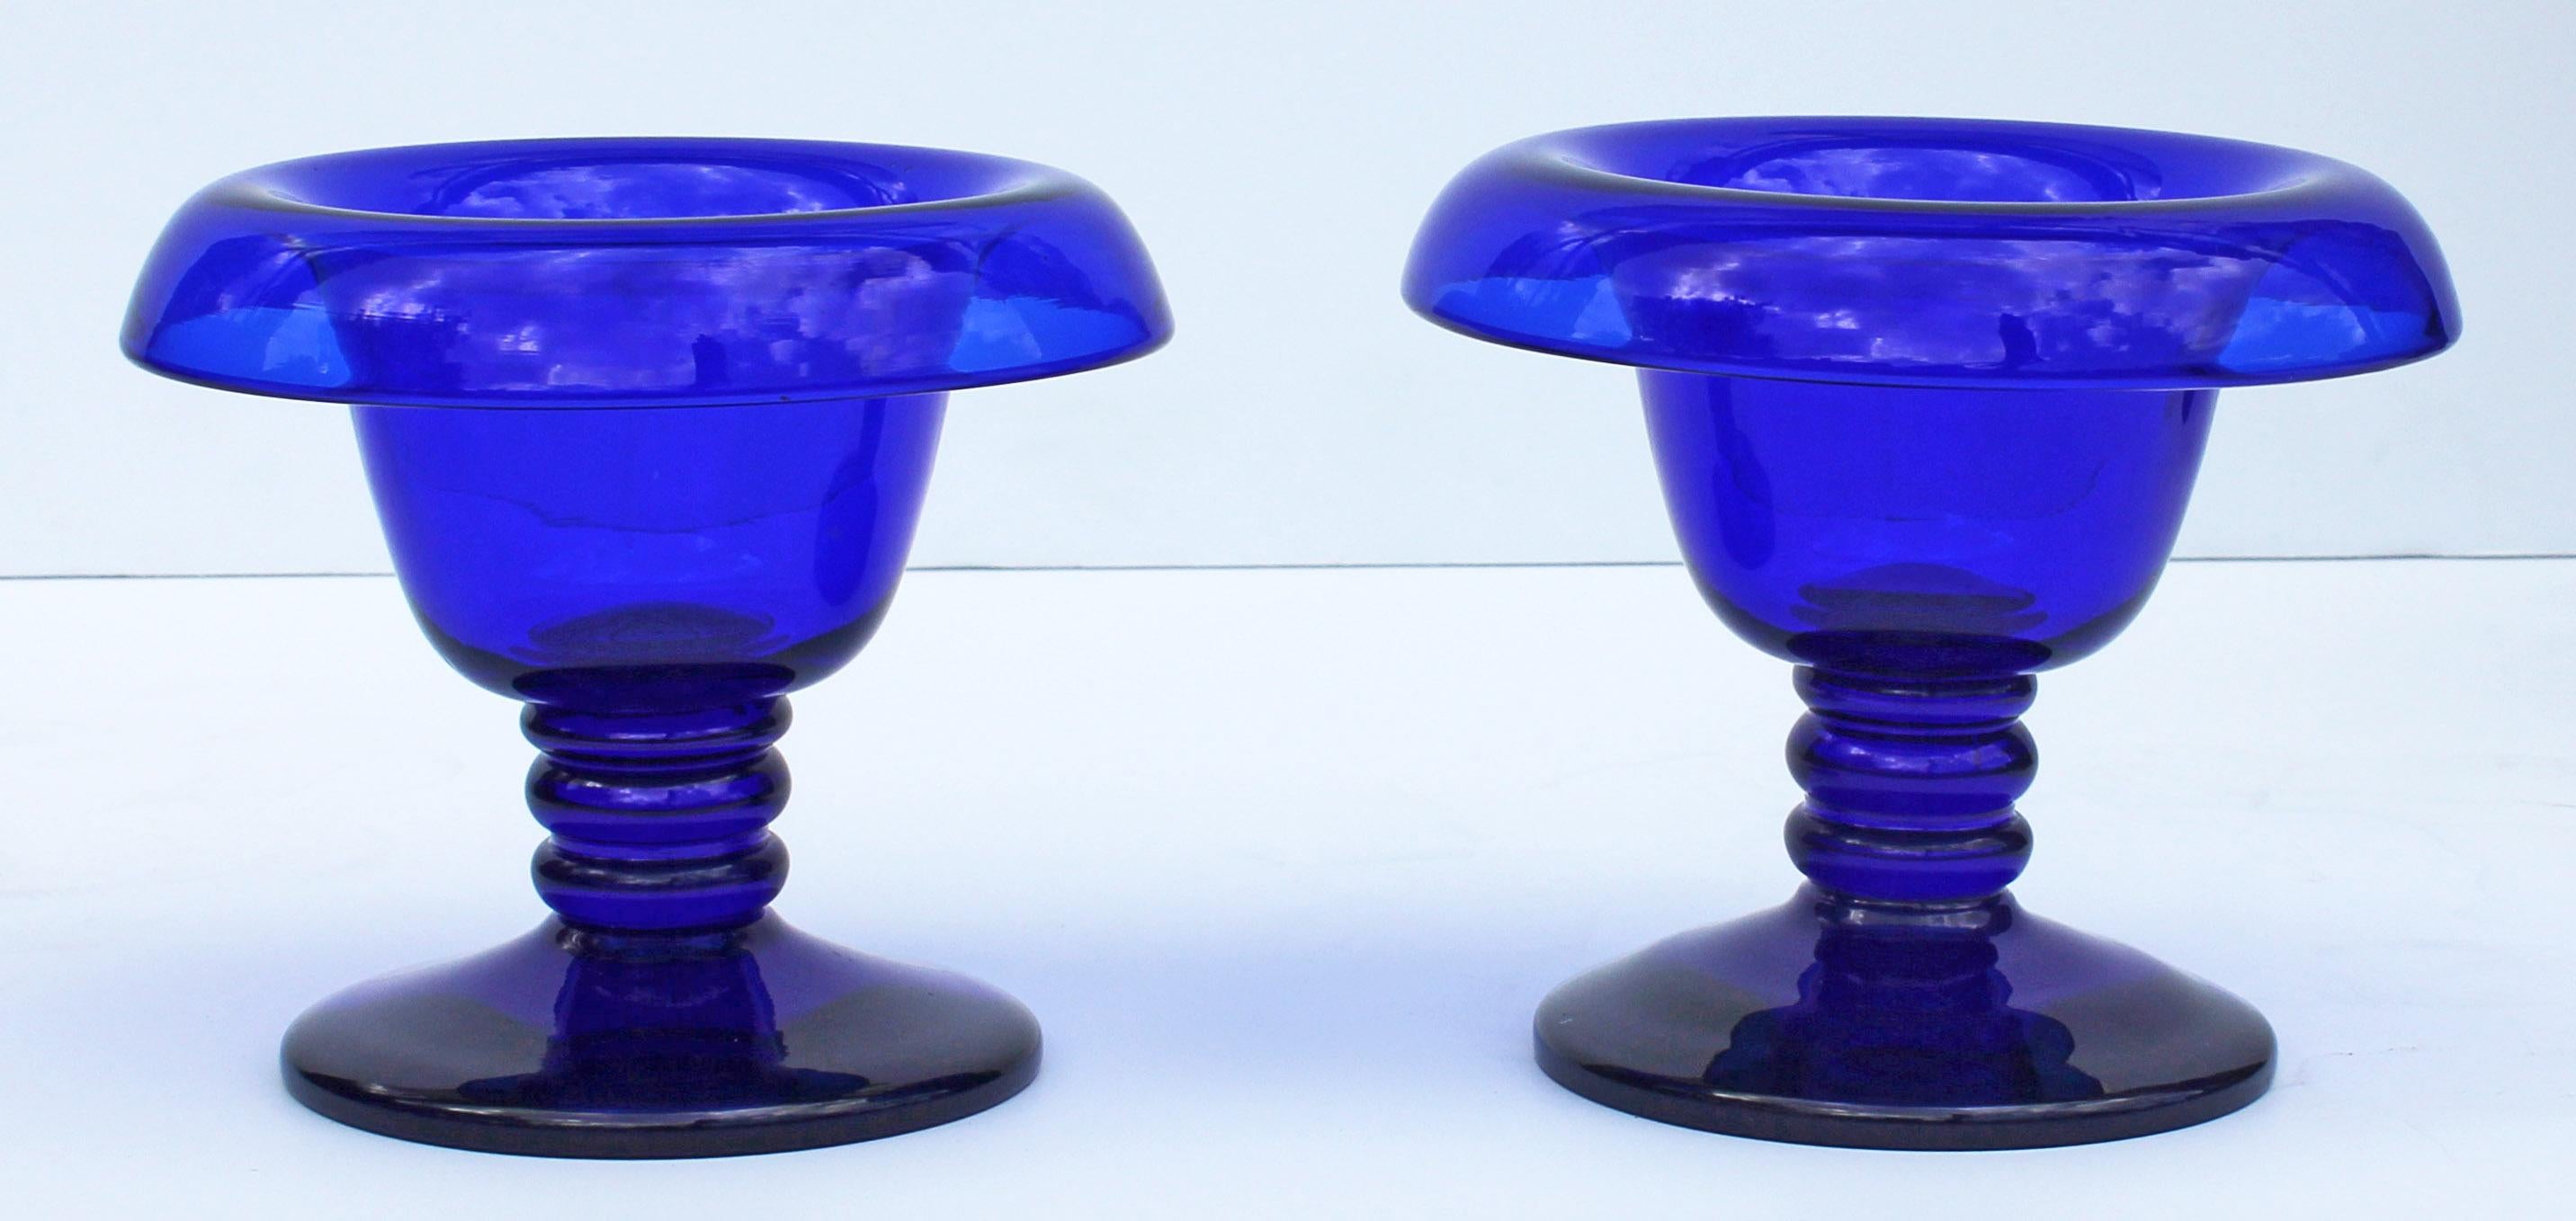 Pair of antique cobalt blue glass compotes. With heavy ground bottoms. High quality, 19th century continental.